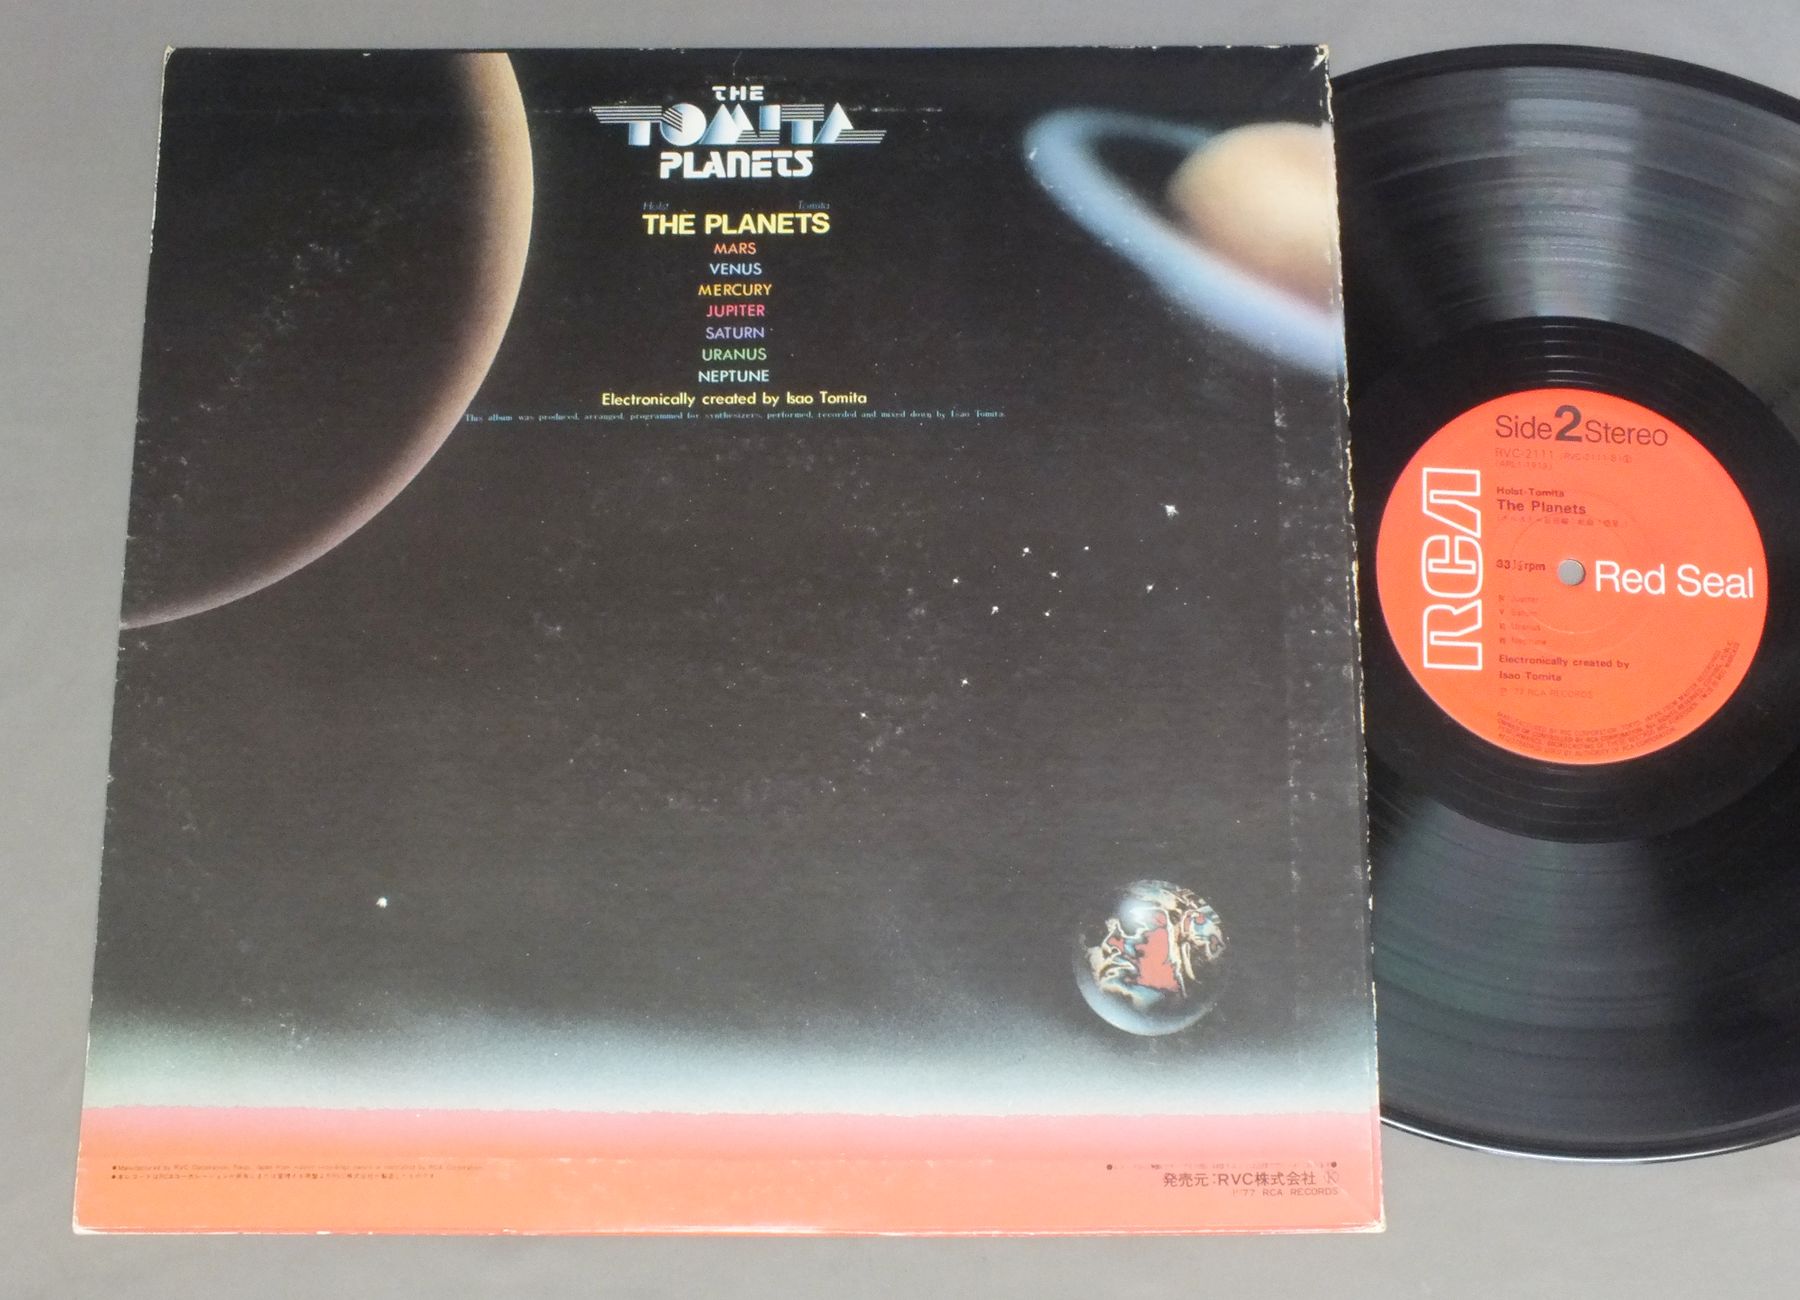 The Tomita Planets 